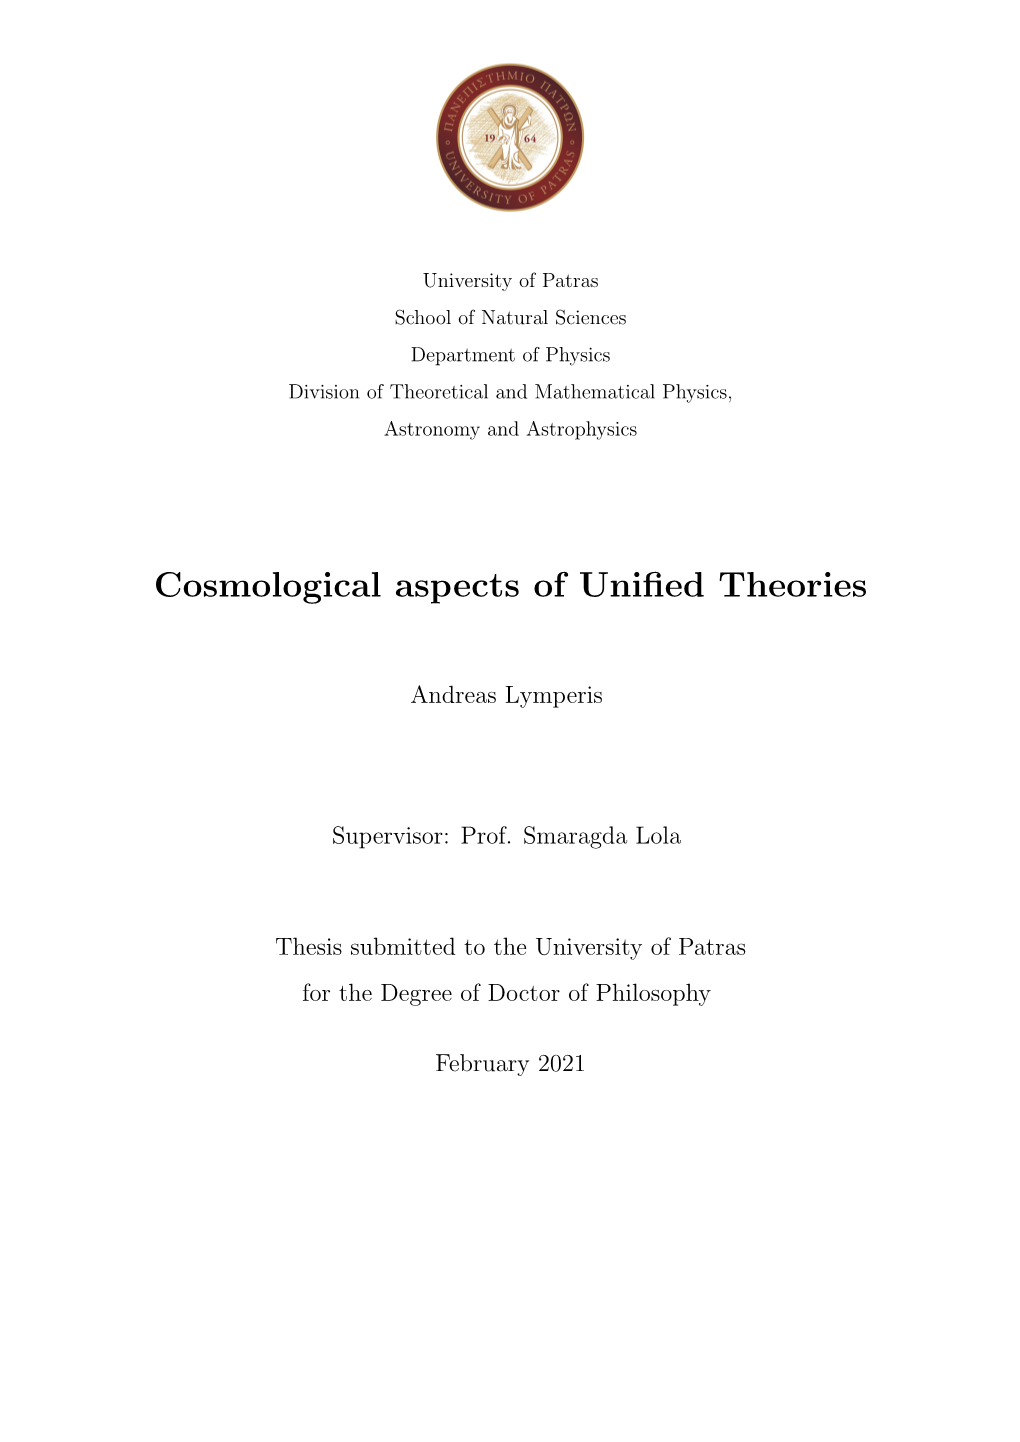 Cosmological Aspects of Unified Theories